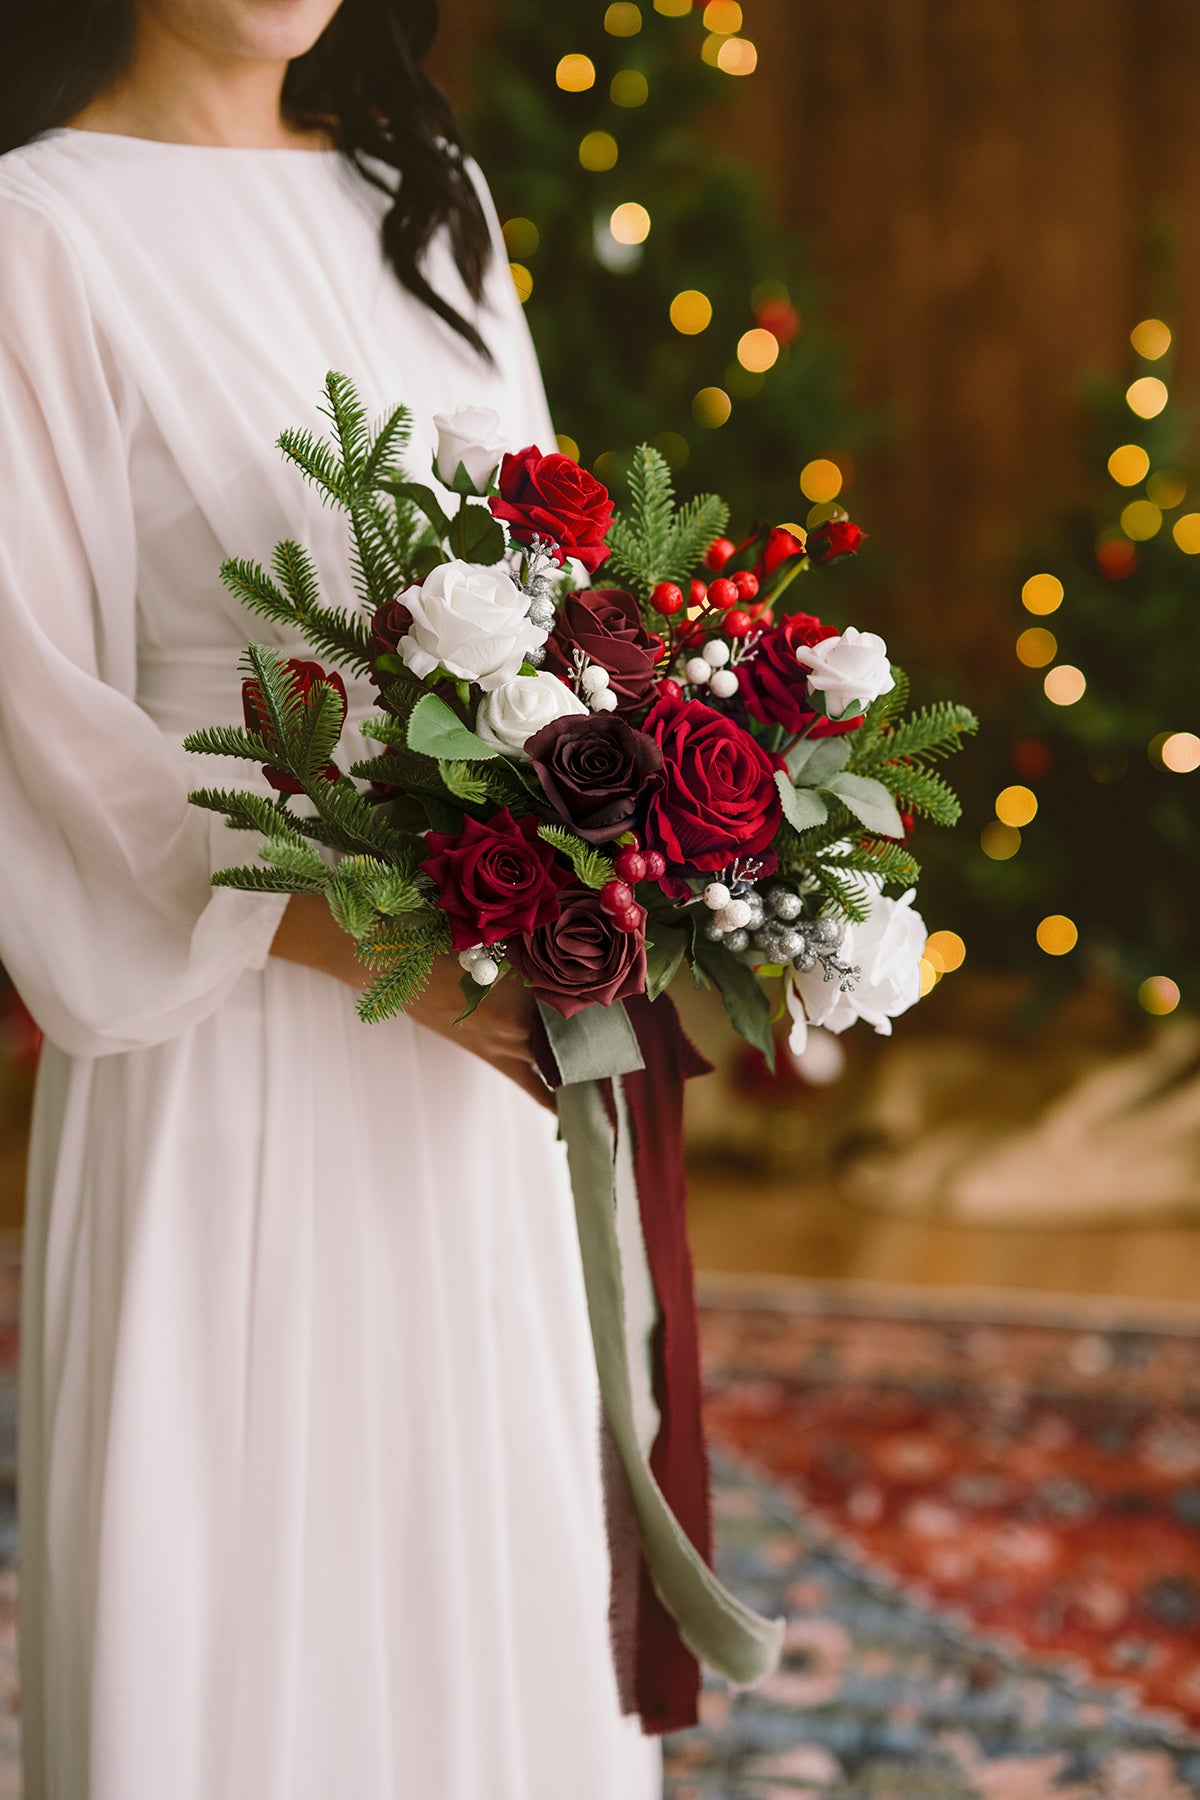 Small Free-Form Bridal Bouquet in Christmas Red & Sparkle